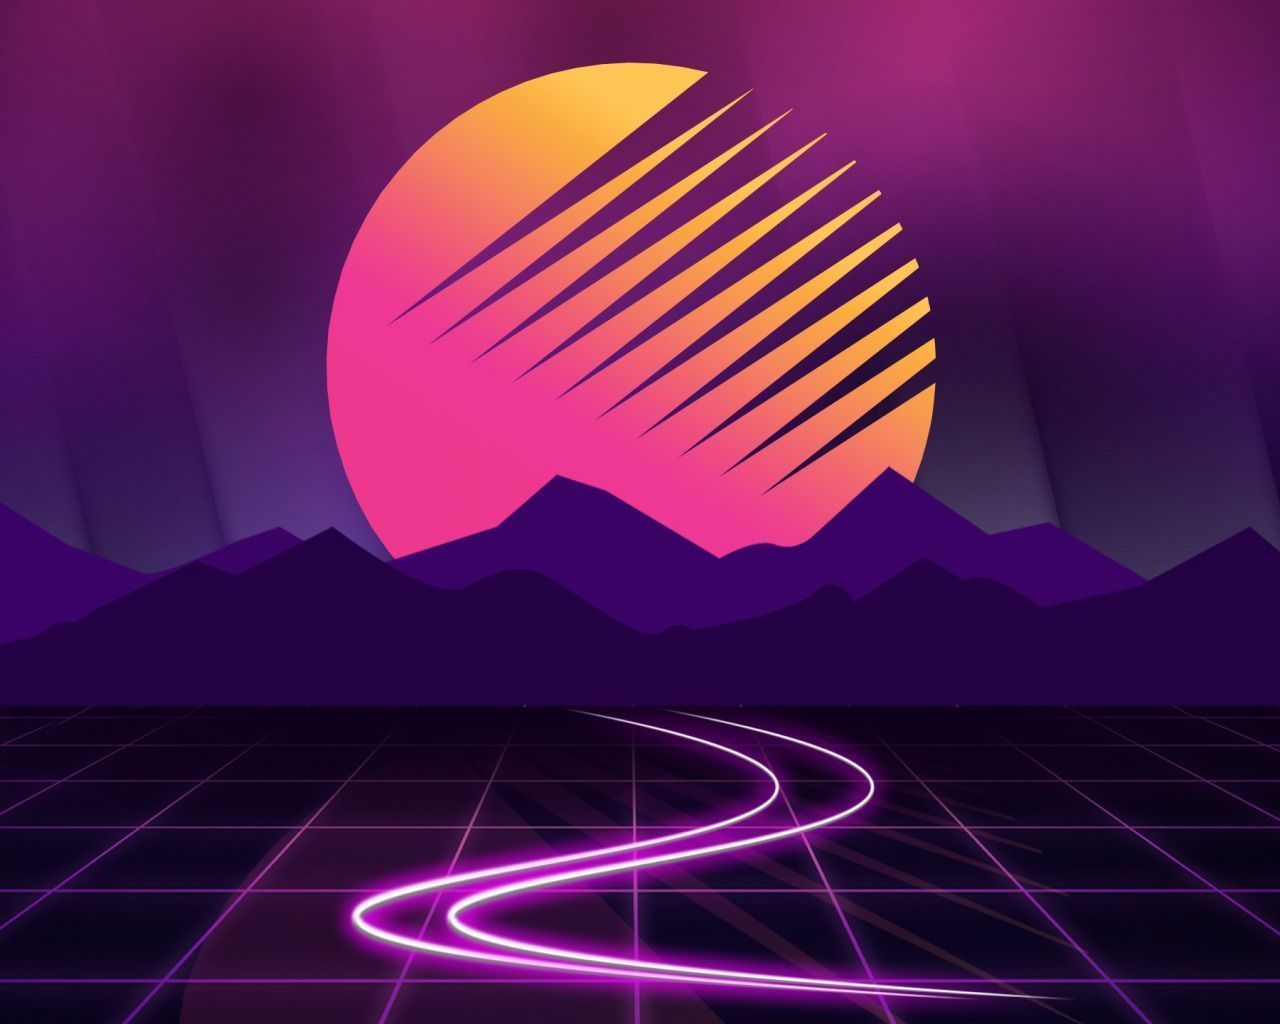 Download wallpaper The sun, Mountains, Music, Star, Background, Art, 80s, 80's, Synth, Retrowave, Synthwave, New Retro Wave, Futuresynth, Sintav, Retrouve, Outrun, section rendering in resolution 1280x1024